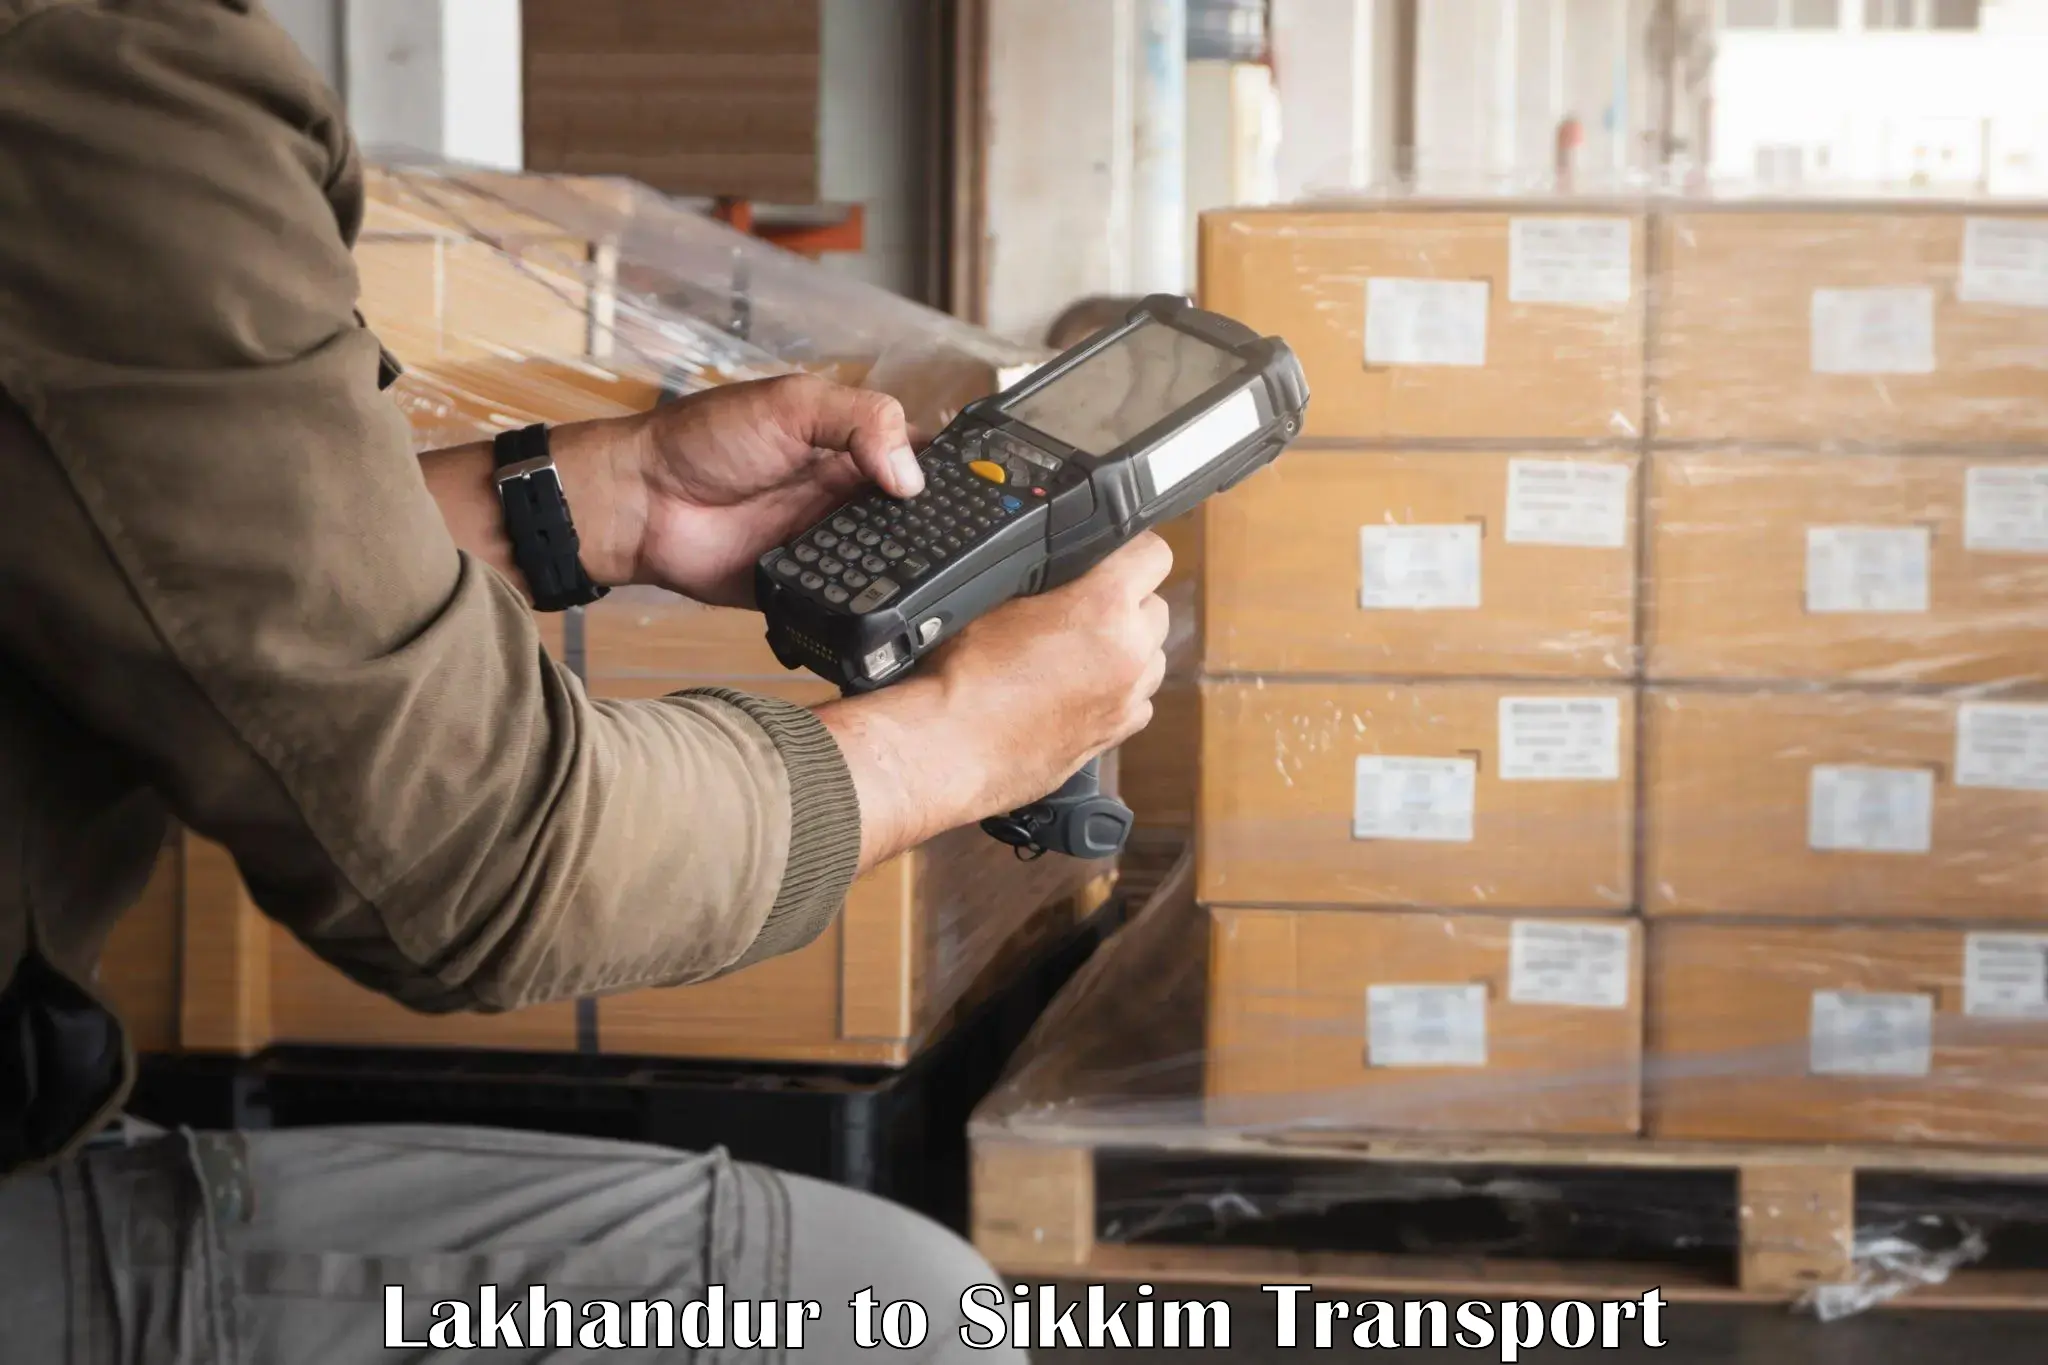 Two wheeler parcel service Lakhandur to East Sikkim